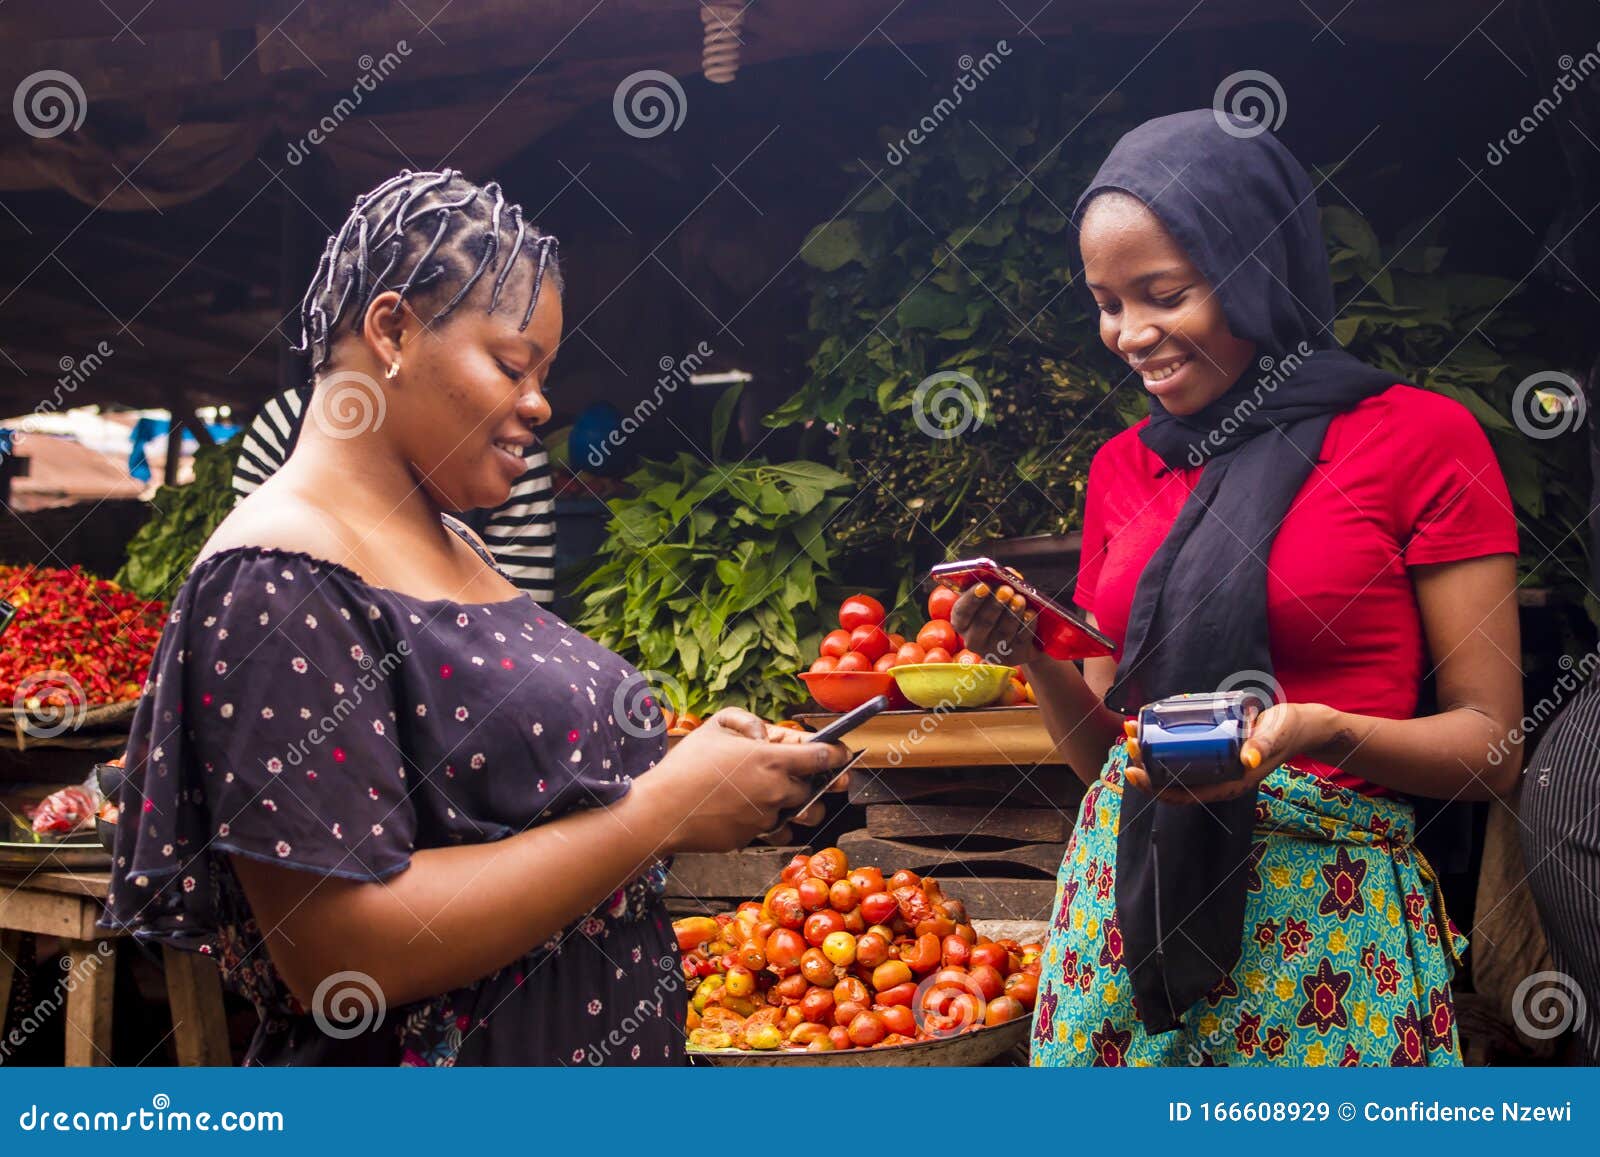 african woman shopping food stuff in a local market paying by doing mobile transfer via phone for a trader